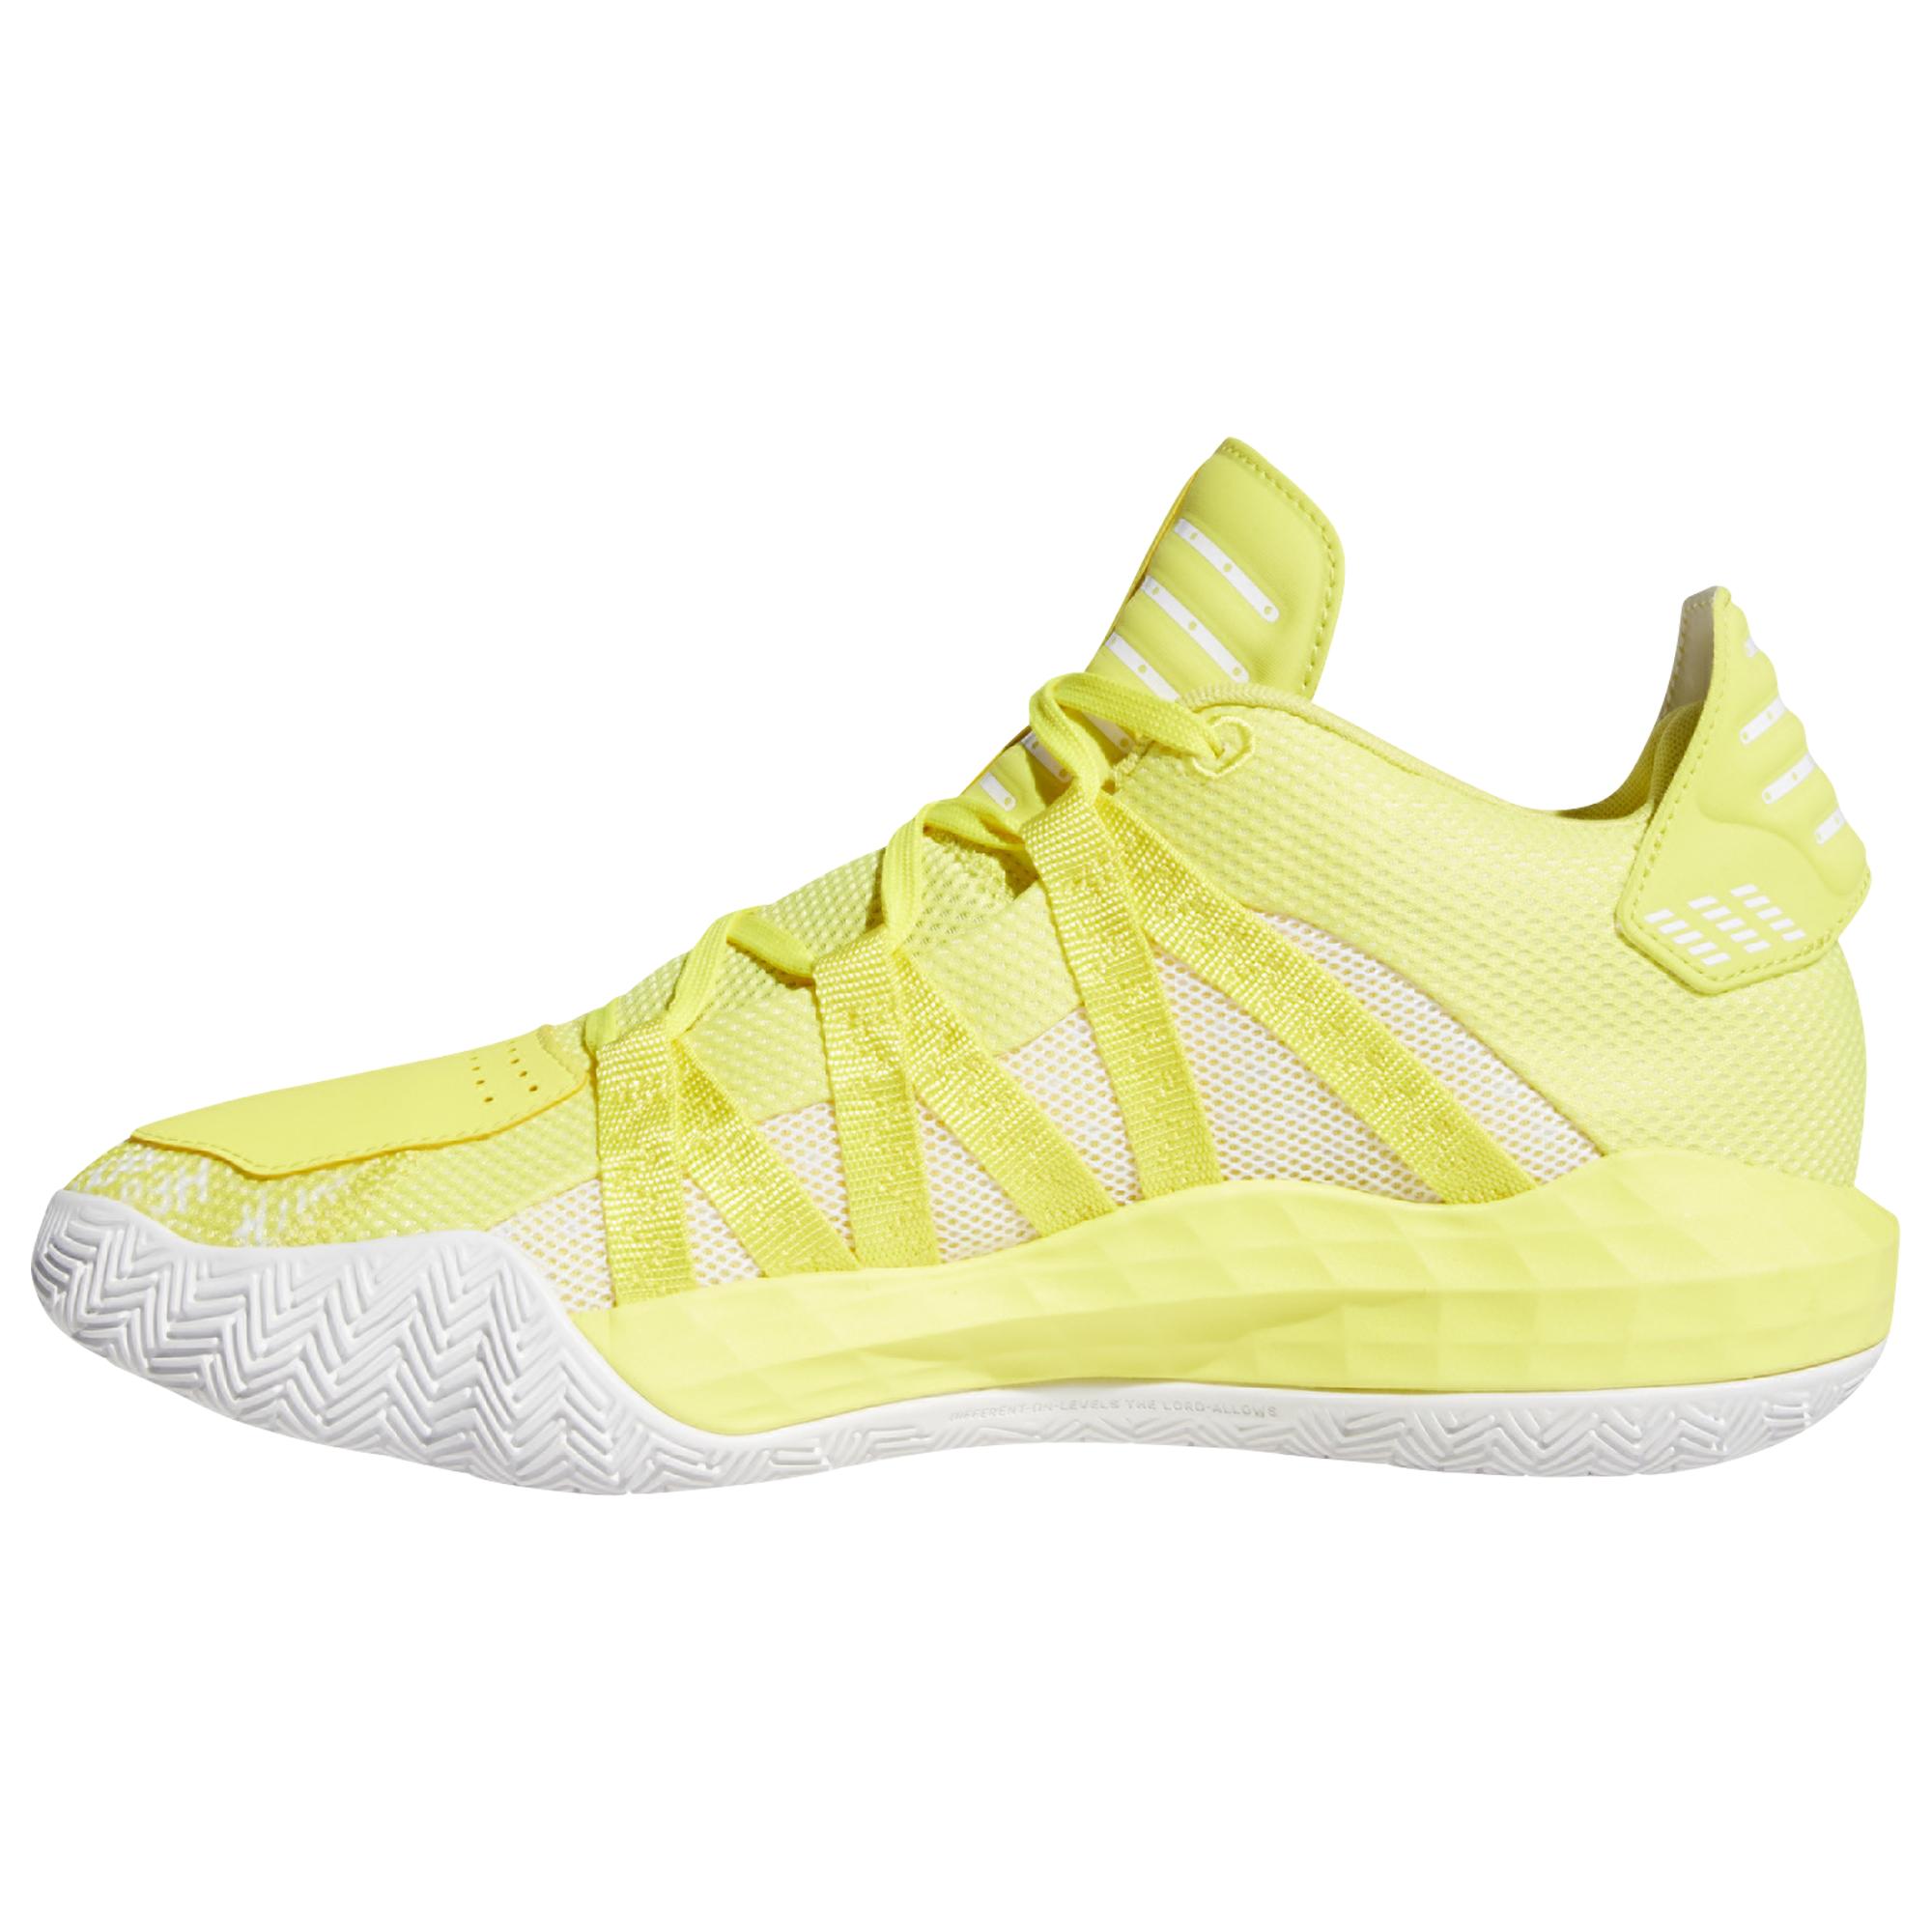 adidas Rubber Dame 6 Shoes in Yellow for Men - Lyst